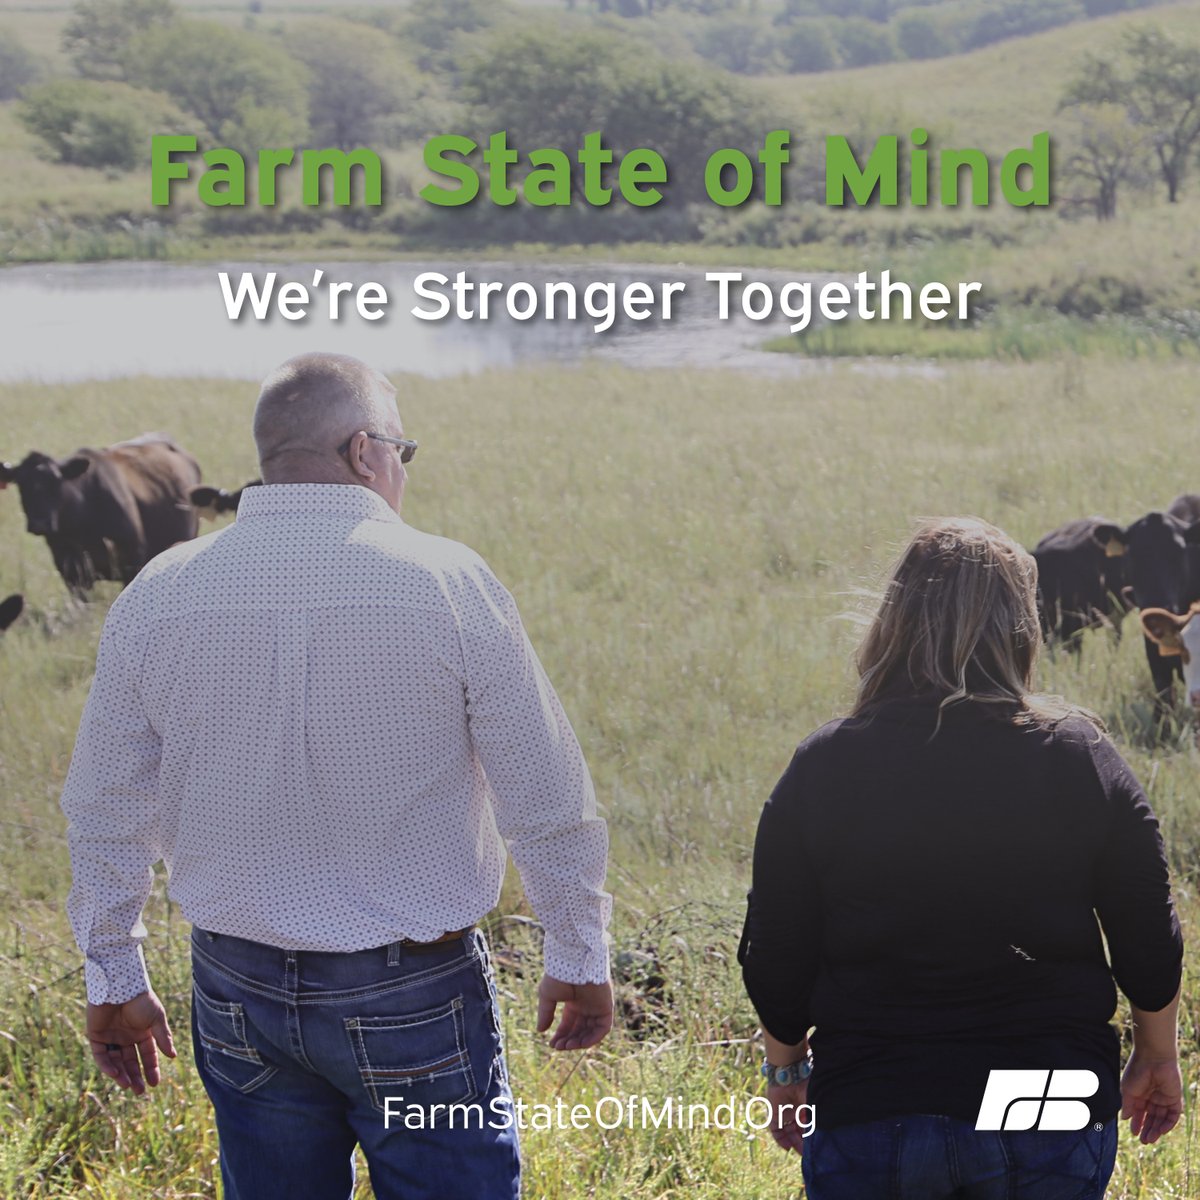 May is Mental Health Month, and Farm Bureau is encouraging farmers & ranchers to use small gestures to make a big impact. You can find resources for mental health at ow.ly/ZsxI50Ruc4R or ow.ly/6Os250Ruc4S. #TogetherAll #FarmStateOfMind #MentalHealth